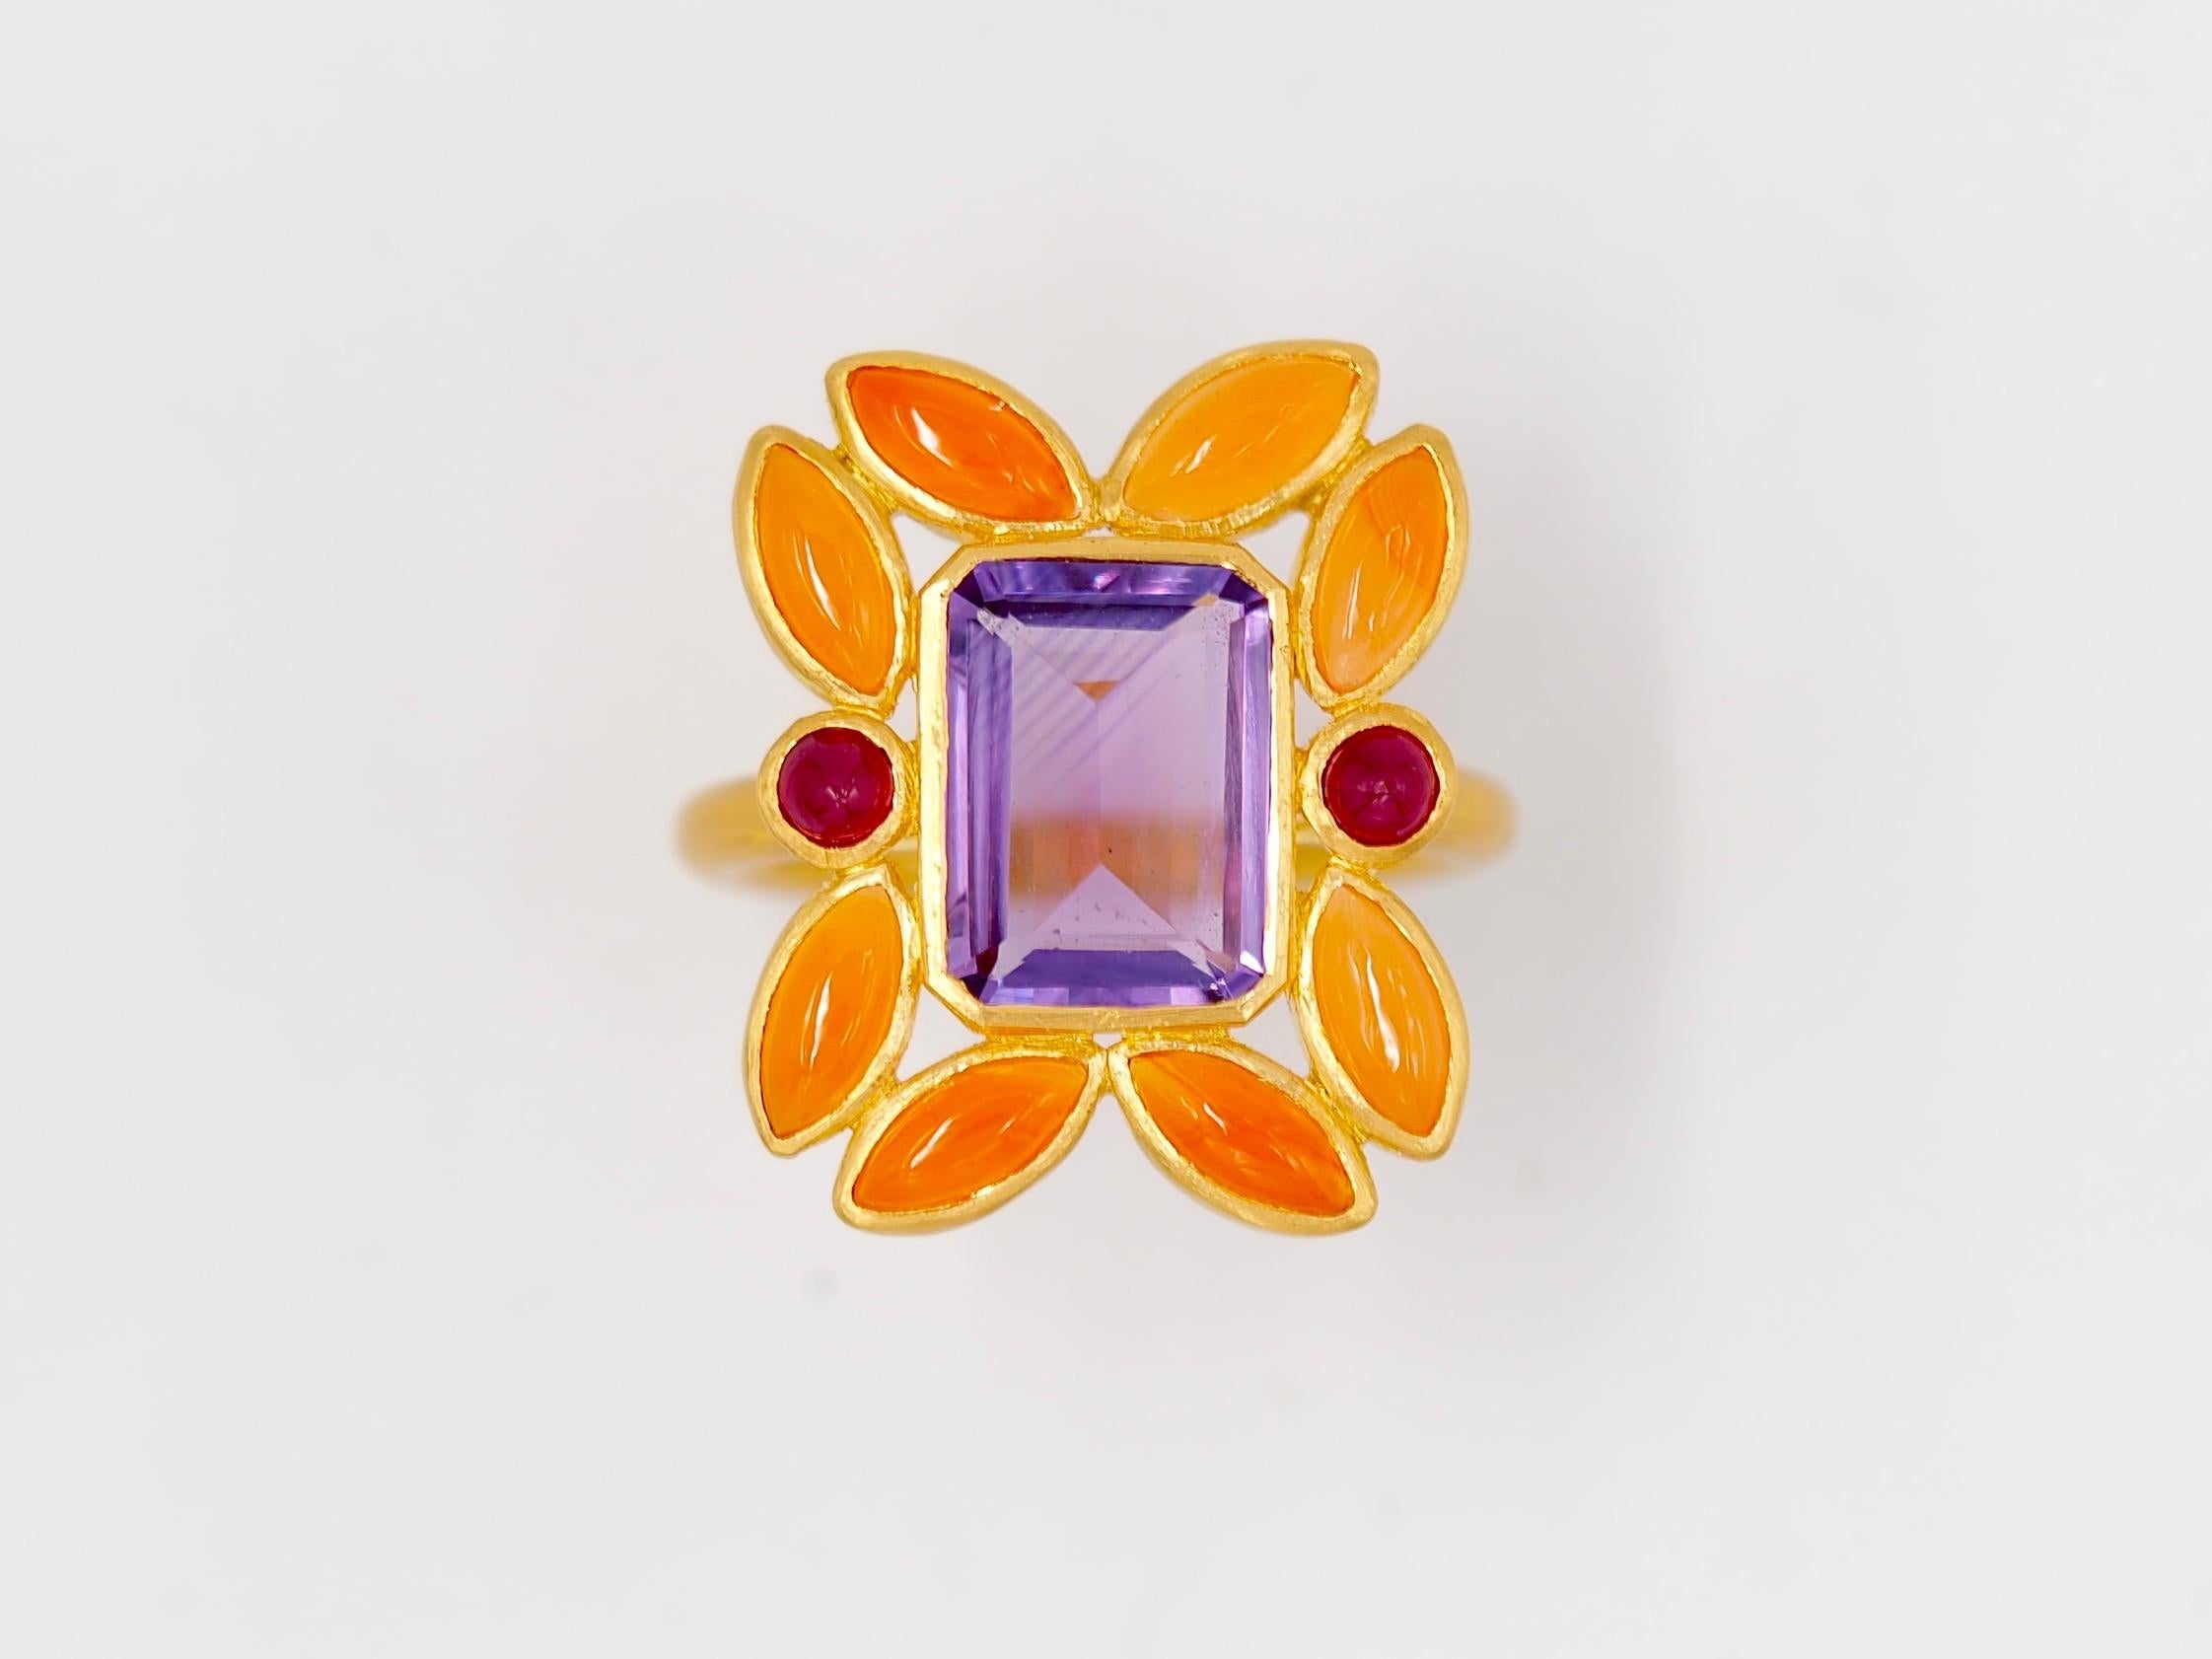 Marquise Cut Scrives Amethyst Cornaline Ruby 22 Karat Gold Cocktail Ring